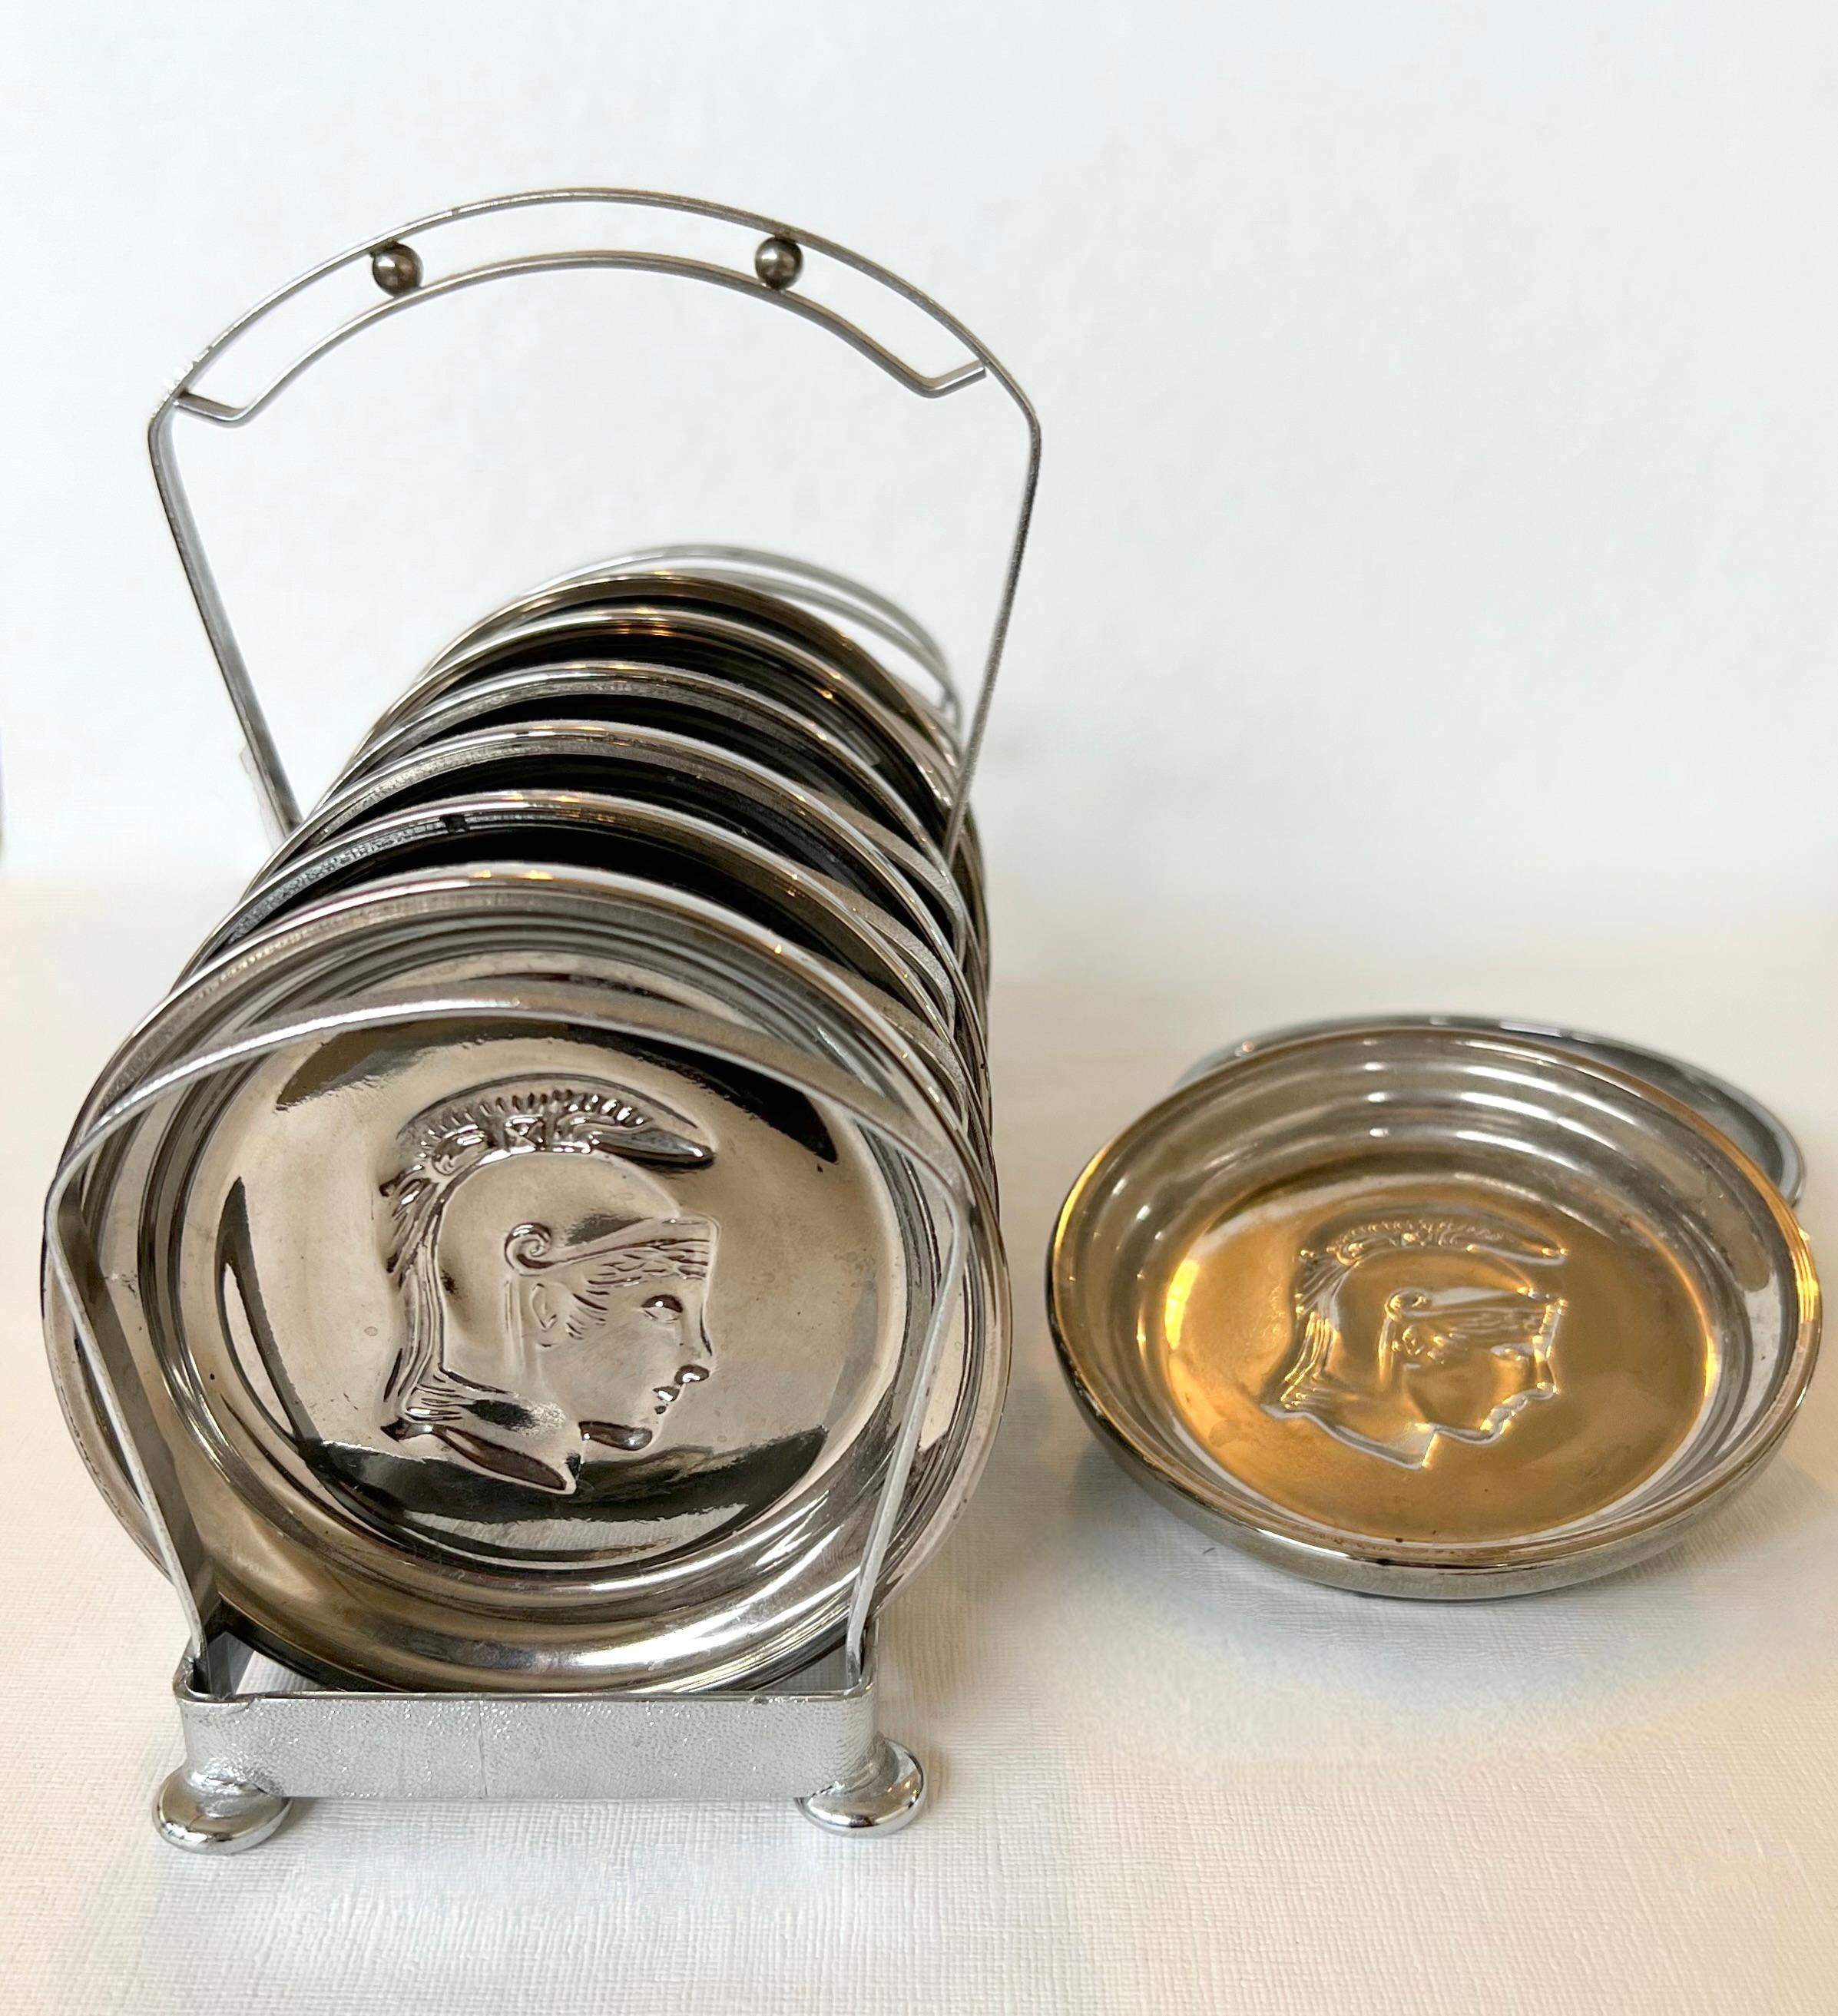 1960s Mercury Glass Roman Centurion Coasters in Caddy.  It includes eight coasters and one caddy with handle.  Each coaster has an embossed head of a Roman soldier or centurion - (a popular midcentury motif).  Perfect for the retro bar